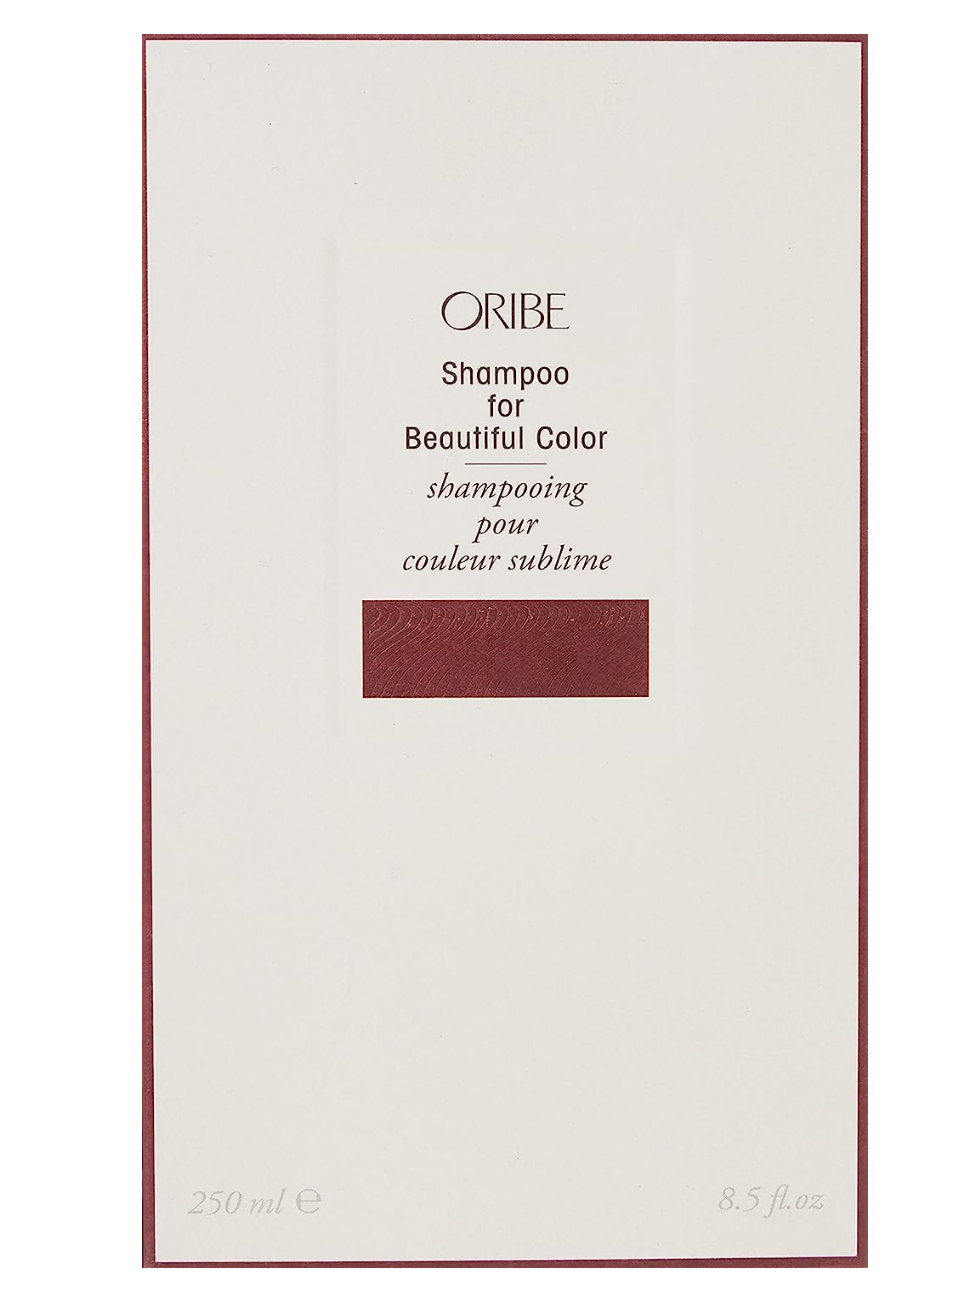 Oribe Shampoo for Beautiful Color Bottle 8.5 Fl Oz (Pack of 1)